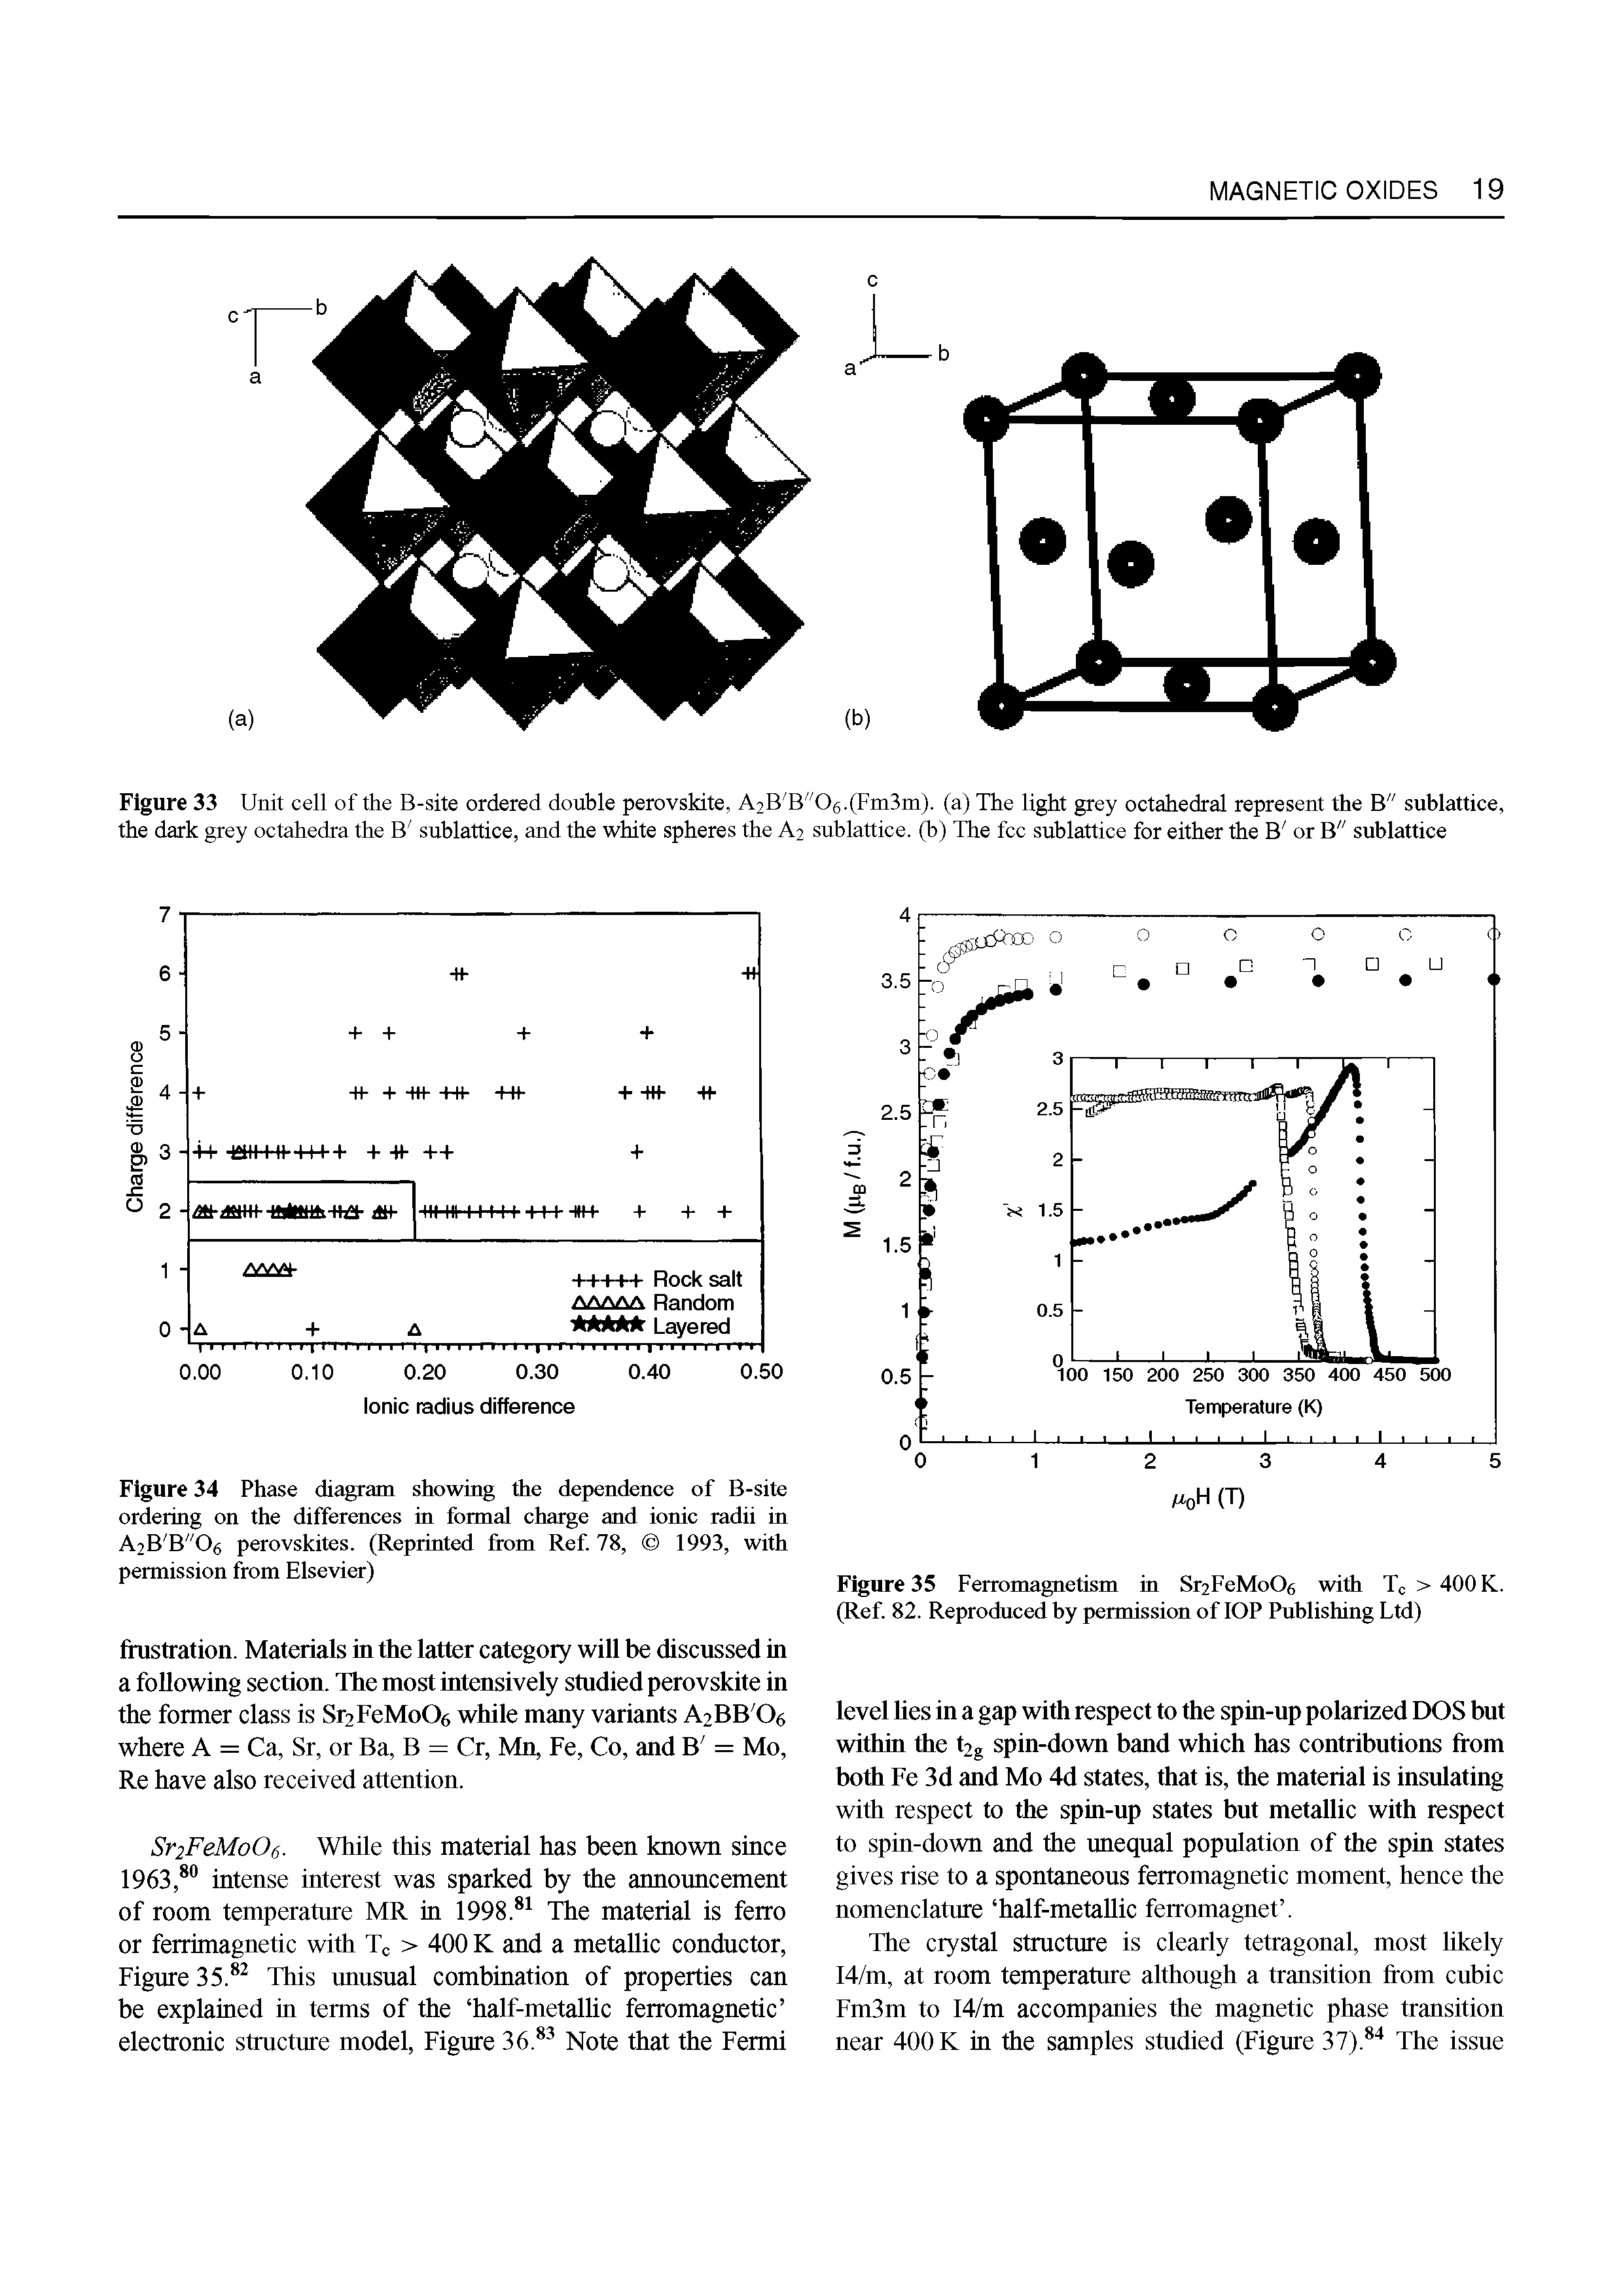 Figure 34 Phase diagram showing the dependence of B-site ordering on the differences in formal charge and ionic radii in A2B B"Og perovskites. (Reprinted from Ref. 78, 1993, with permission from Elsevier)...